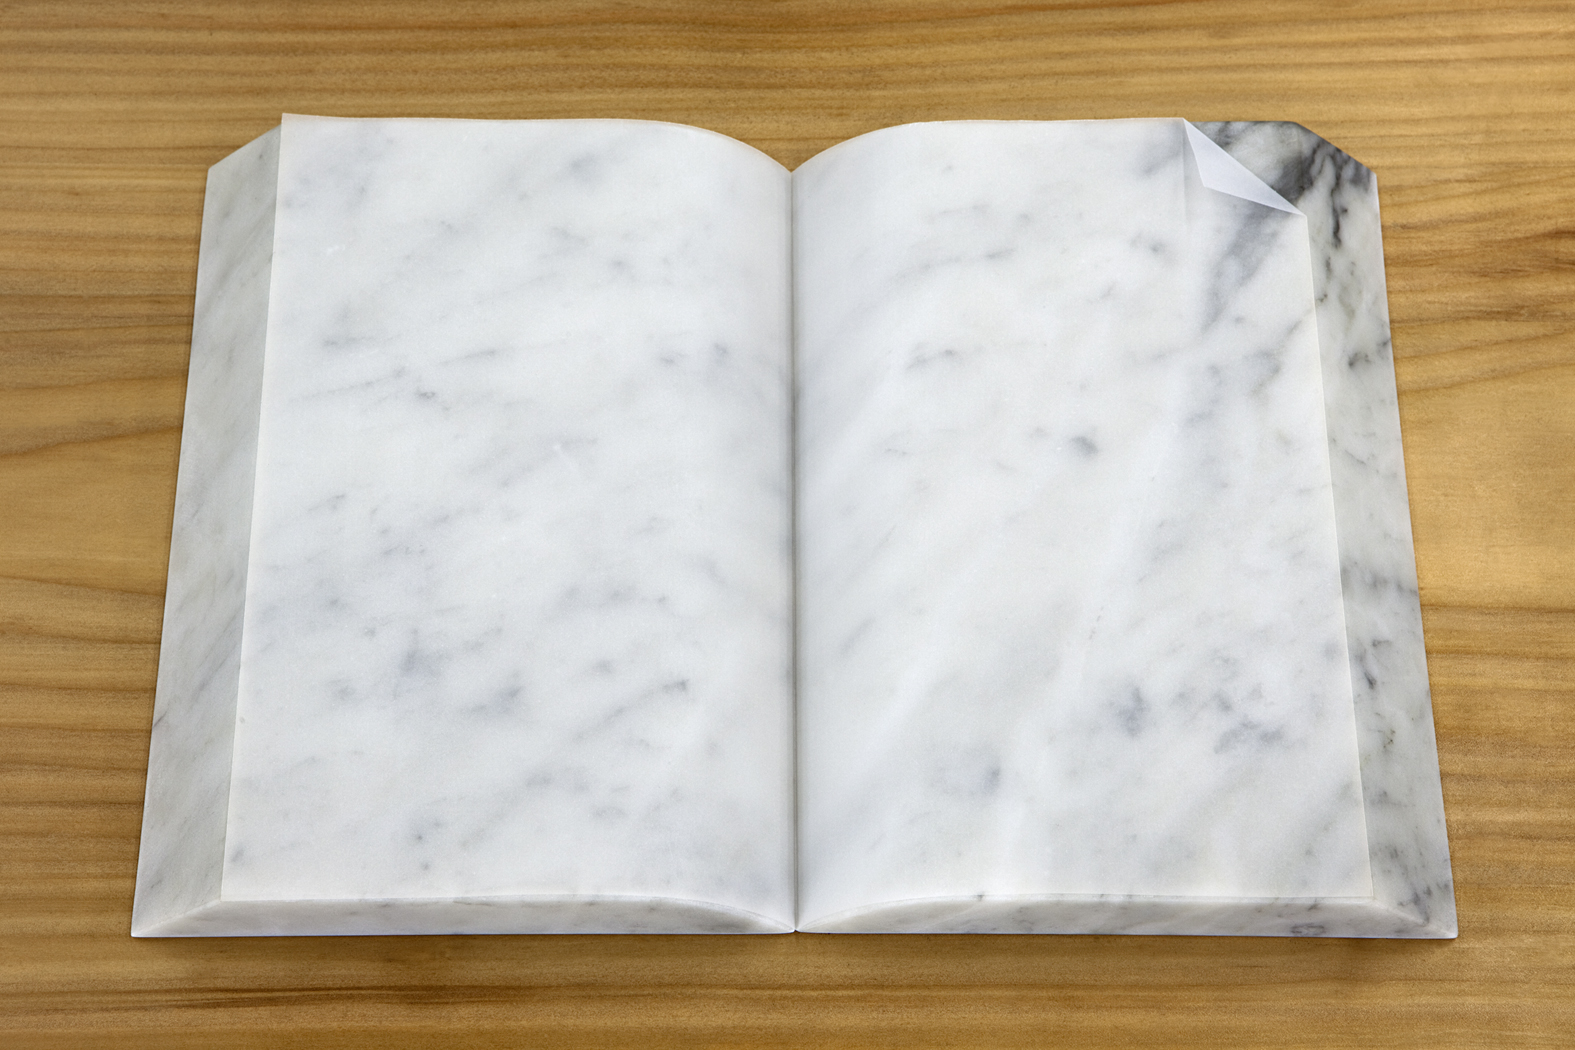 LIVRO/ BOOK (2010) marble and tracing paper, 4 x 25 x 36 cm